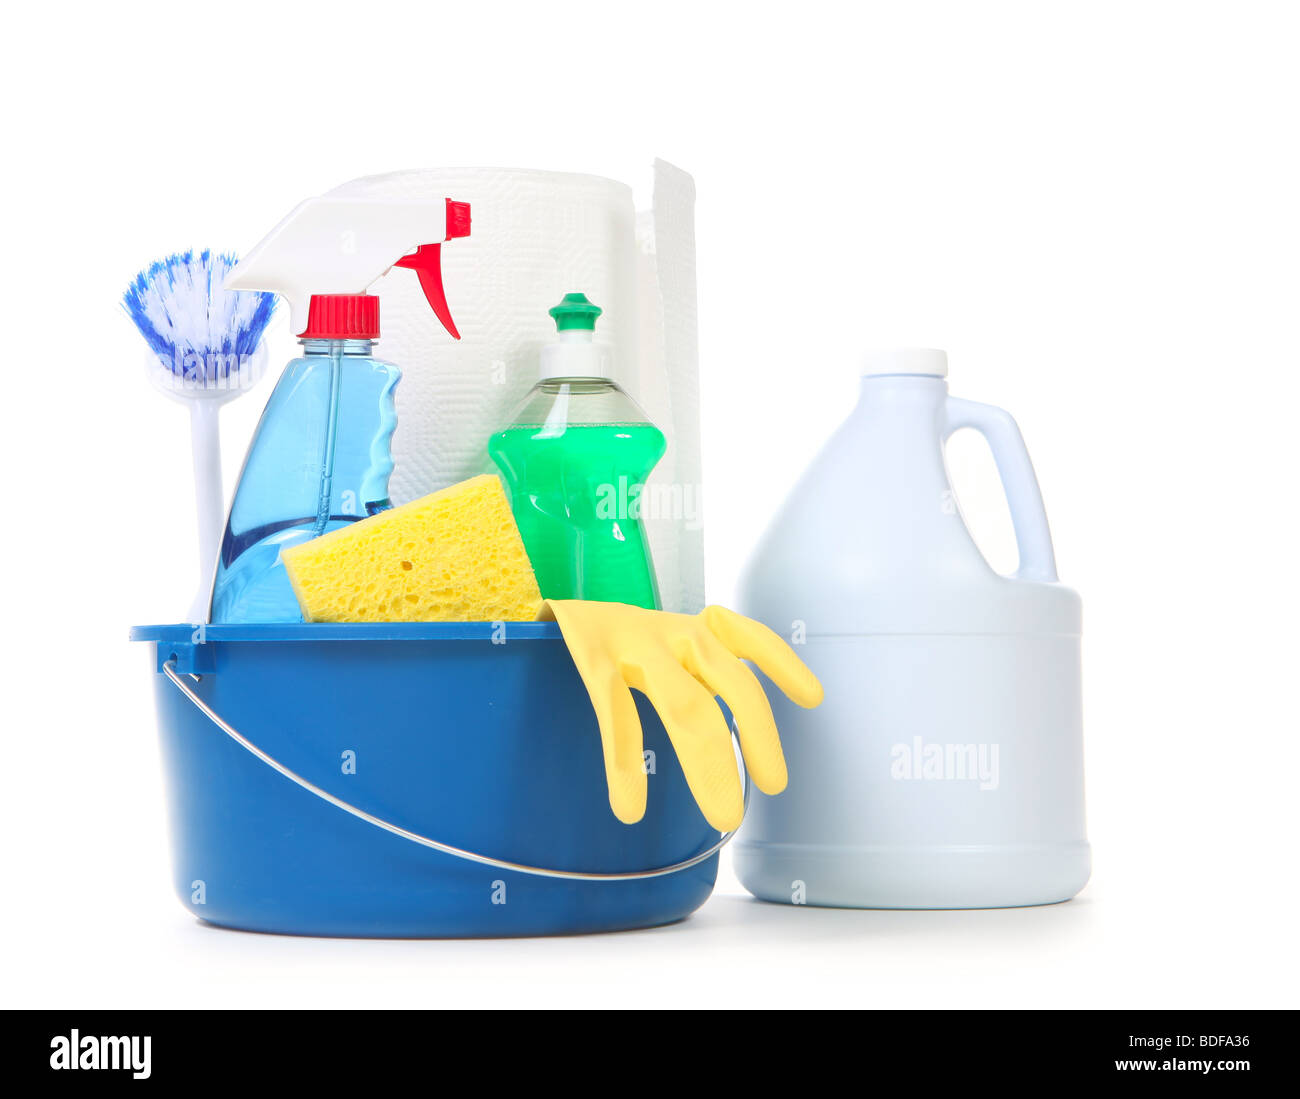 https://c8.alamy.com/comp/BDFA36/cleaning-products-for-daily-use-in-the-home-on-white-background-BDFA36.jpg